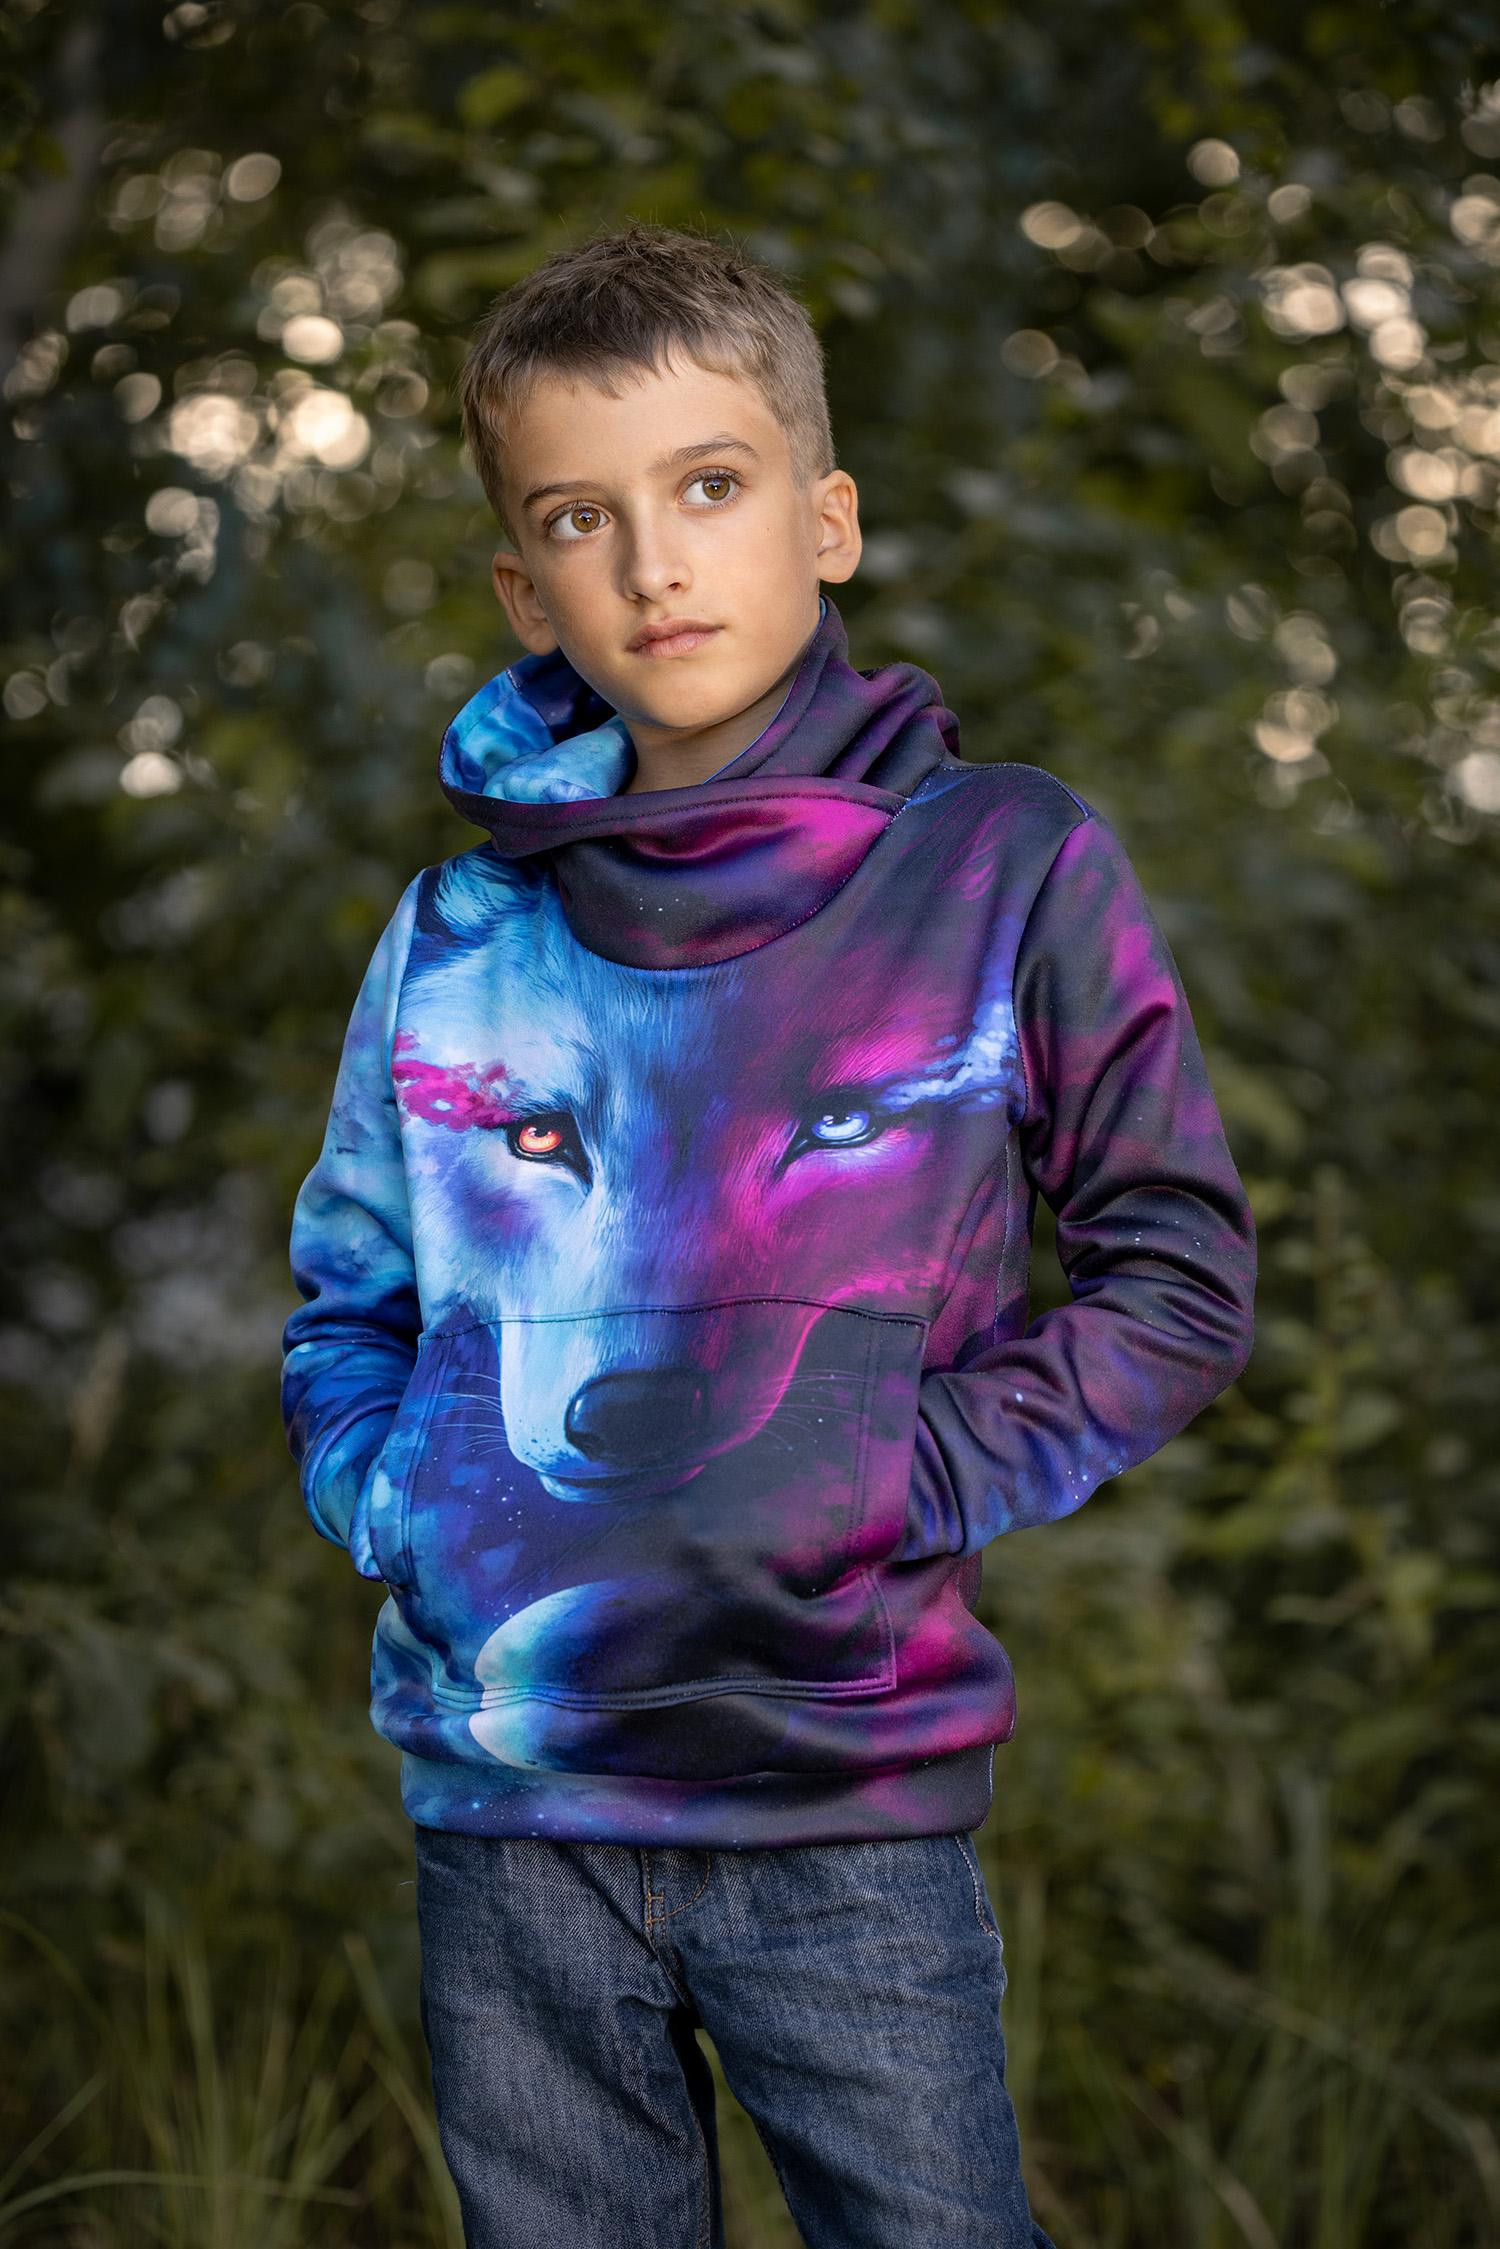 HYDROPHOBIC HOODIE UNISEX - HERE COMES THE SUN - sewing set